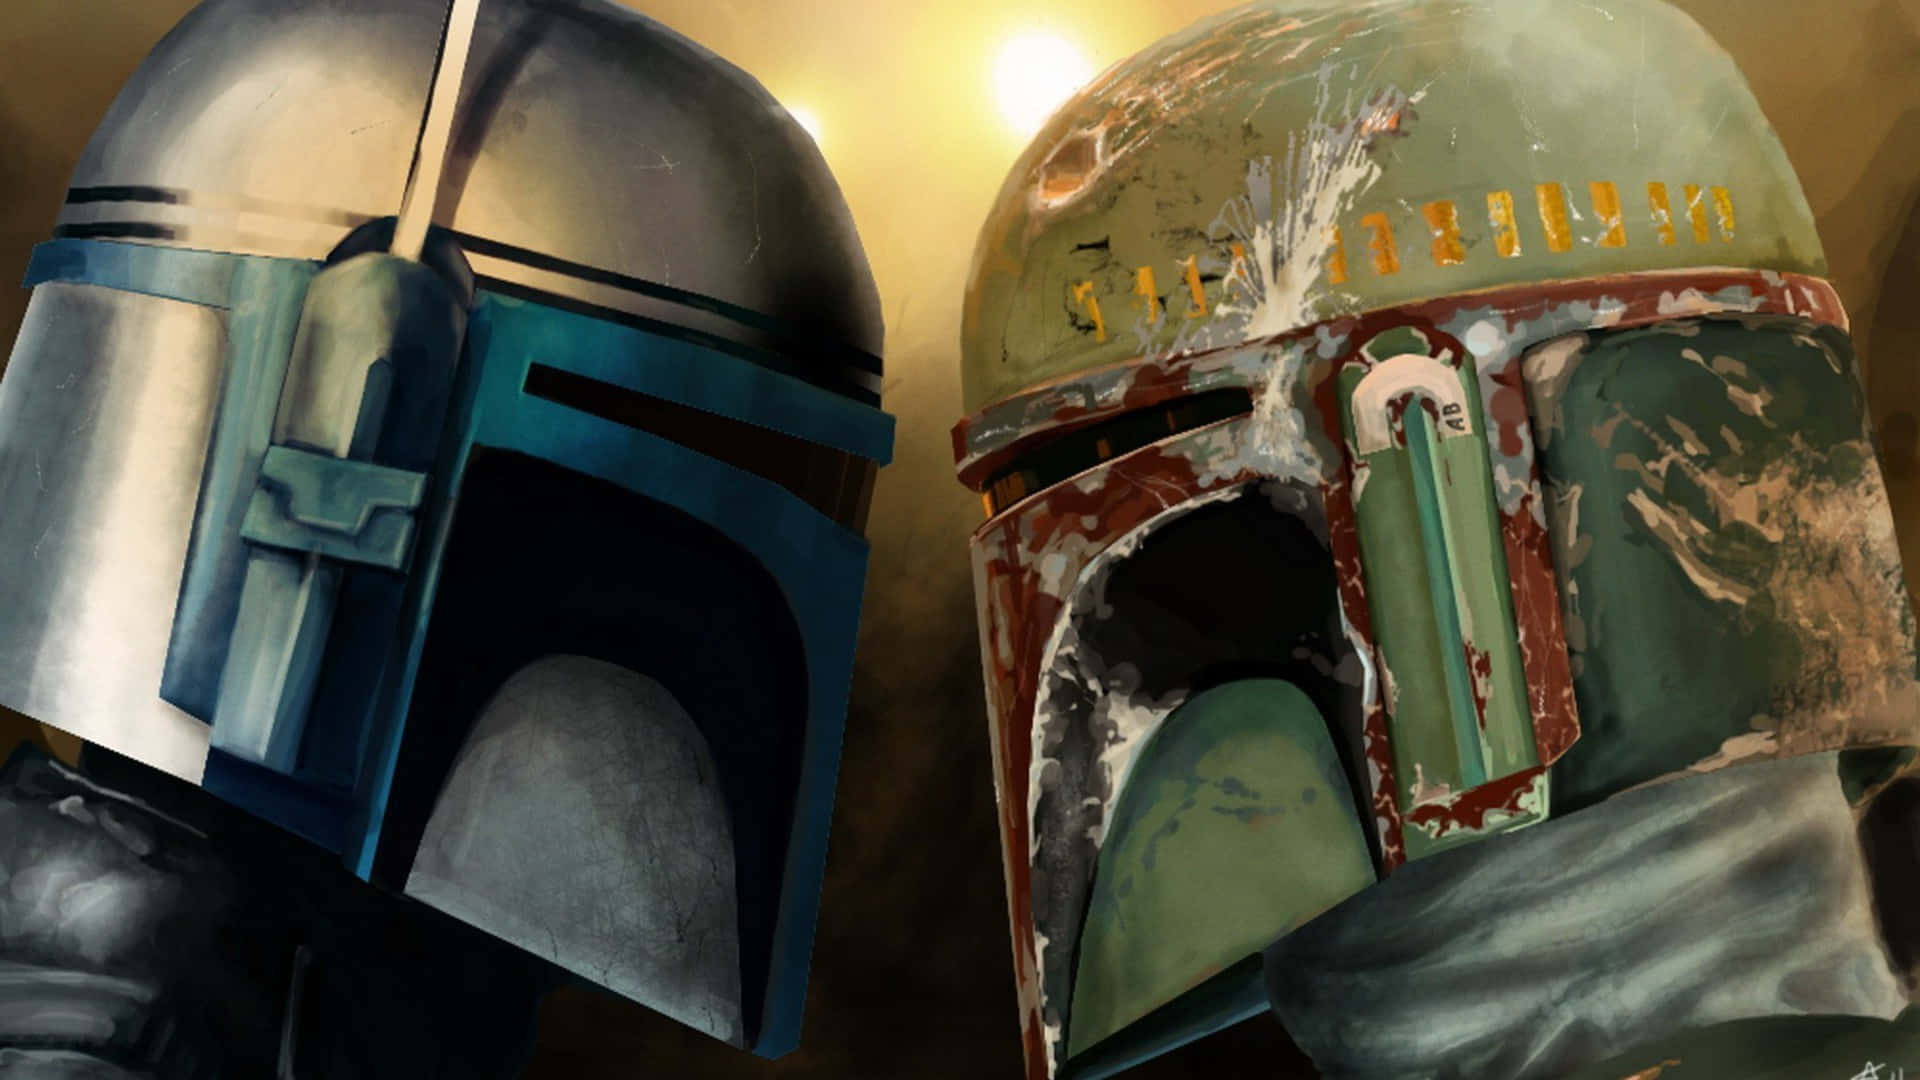 Boba Fett standing tall in a captivating action pose